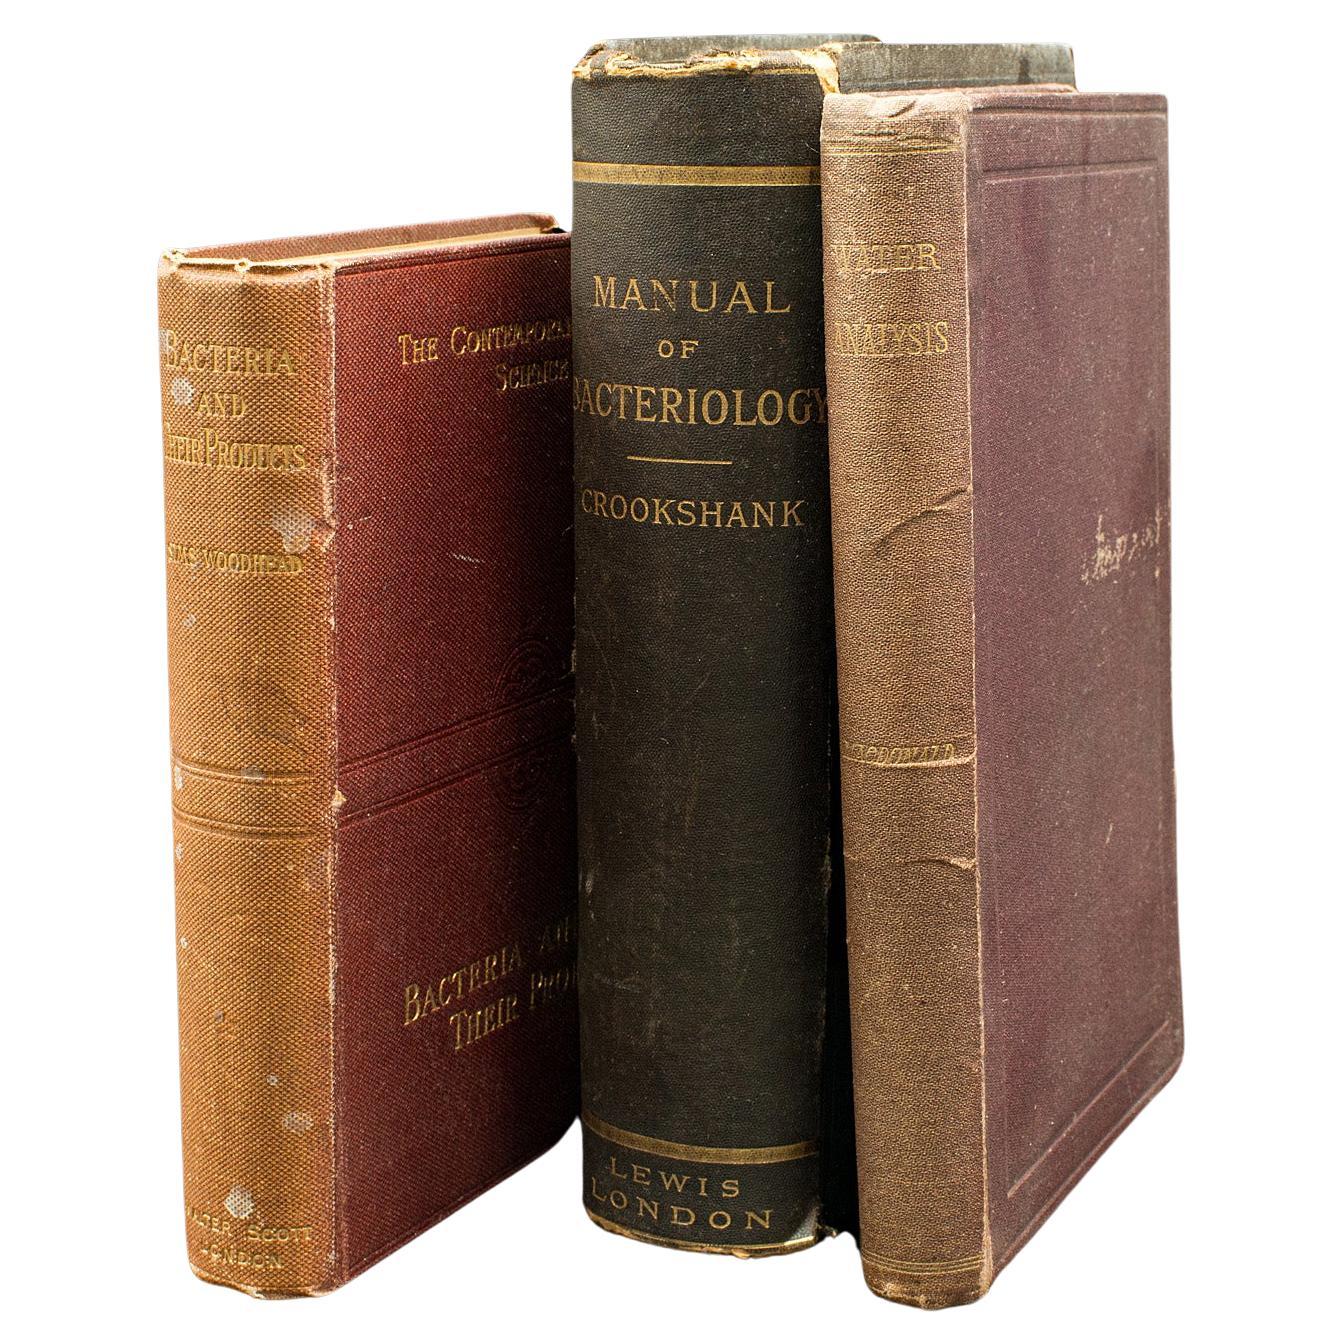 Set of 3 Antique Biology Interest Books, English Scientific Reference, Victorian For Sale